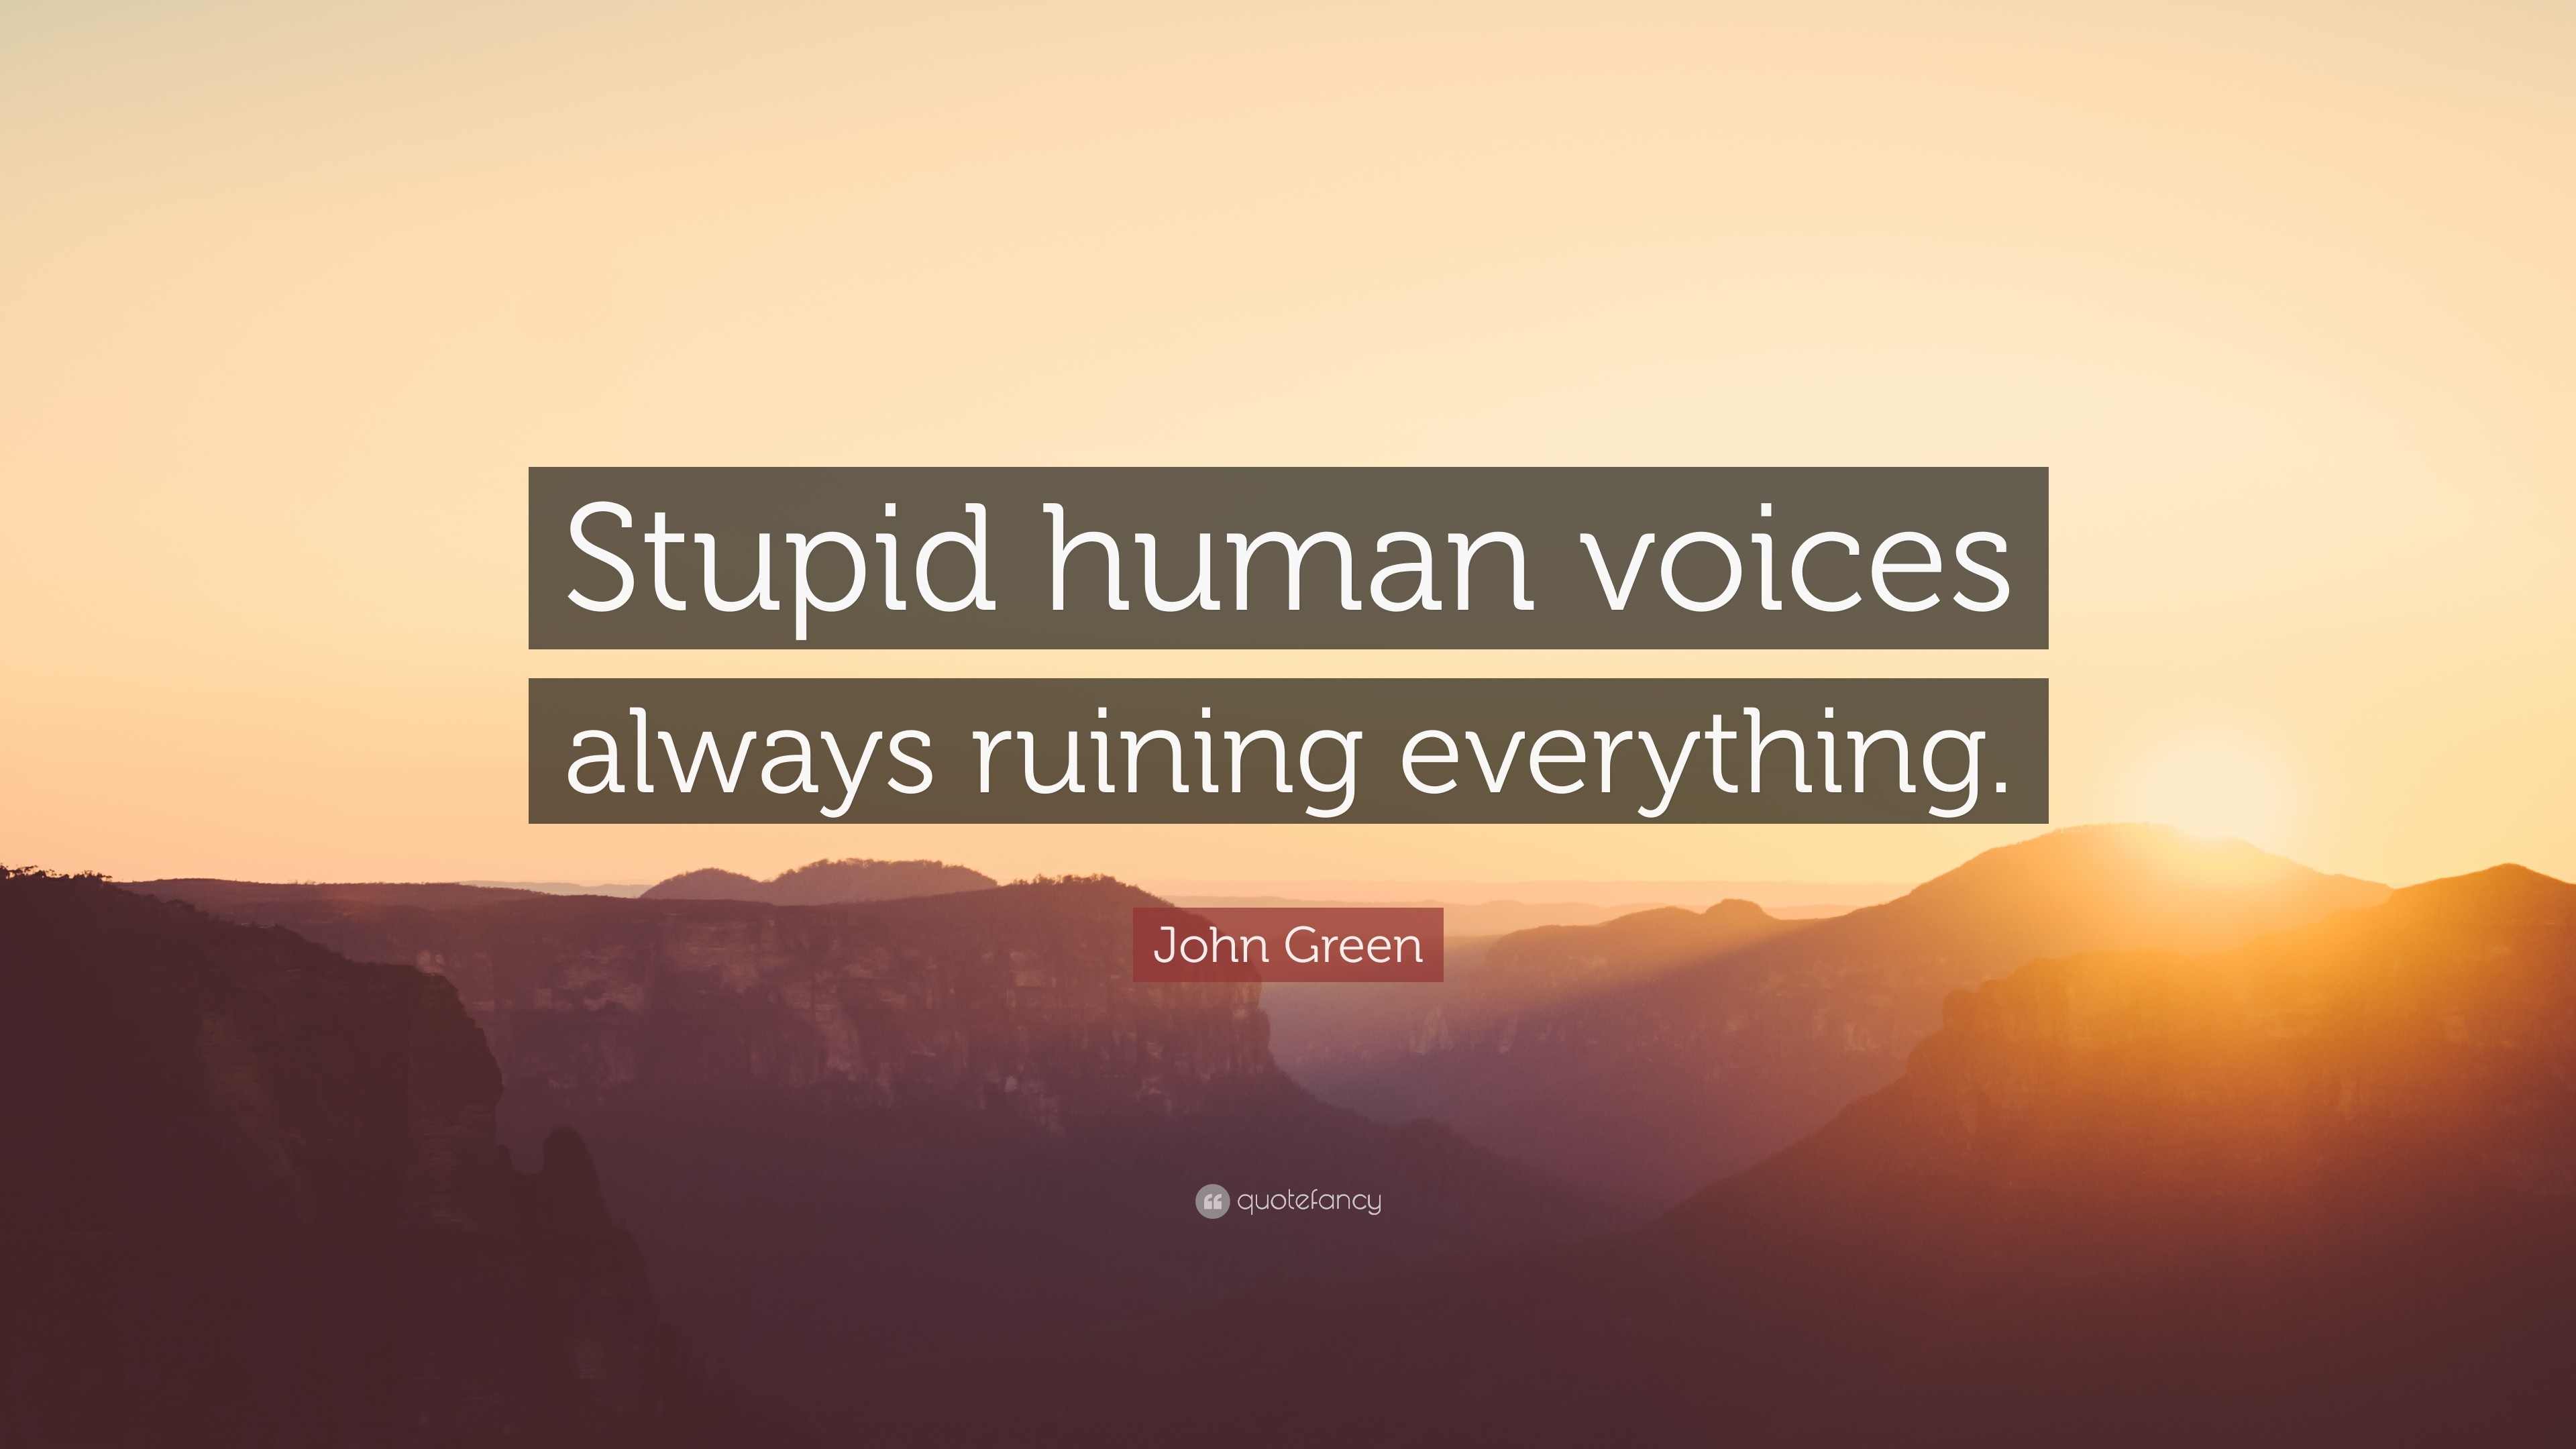 3840x2160 John Green Quote: “Stupid human voices always ruining everything.”